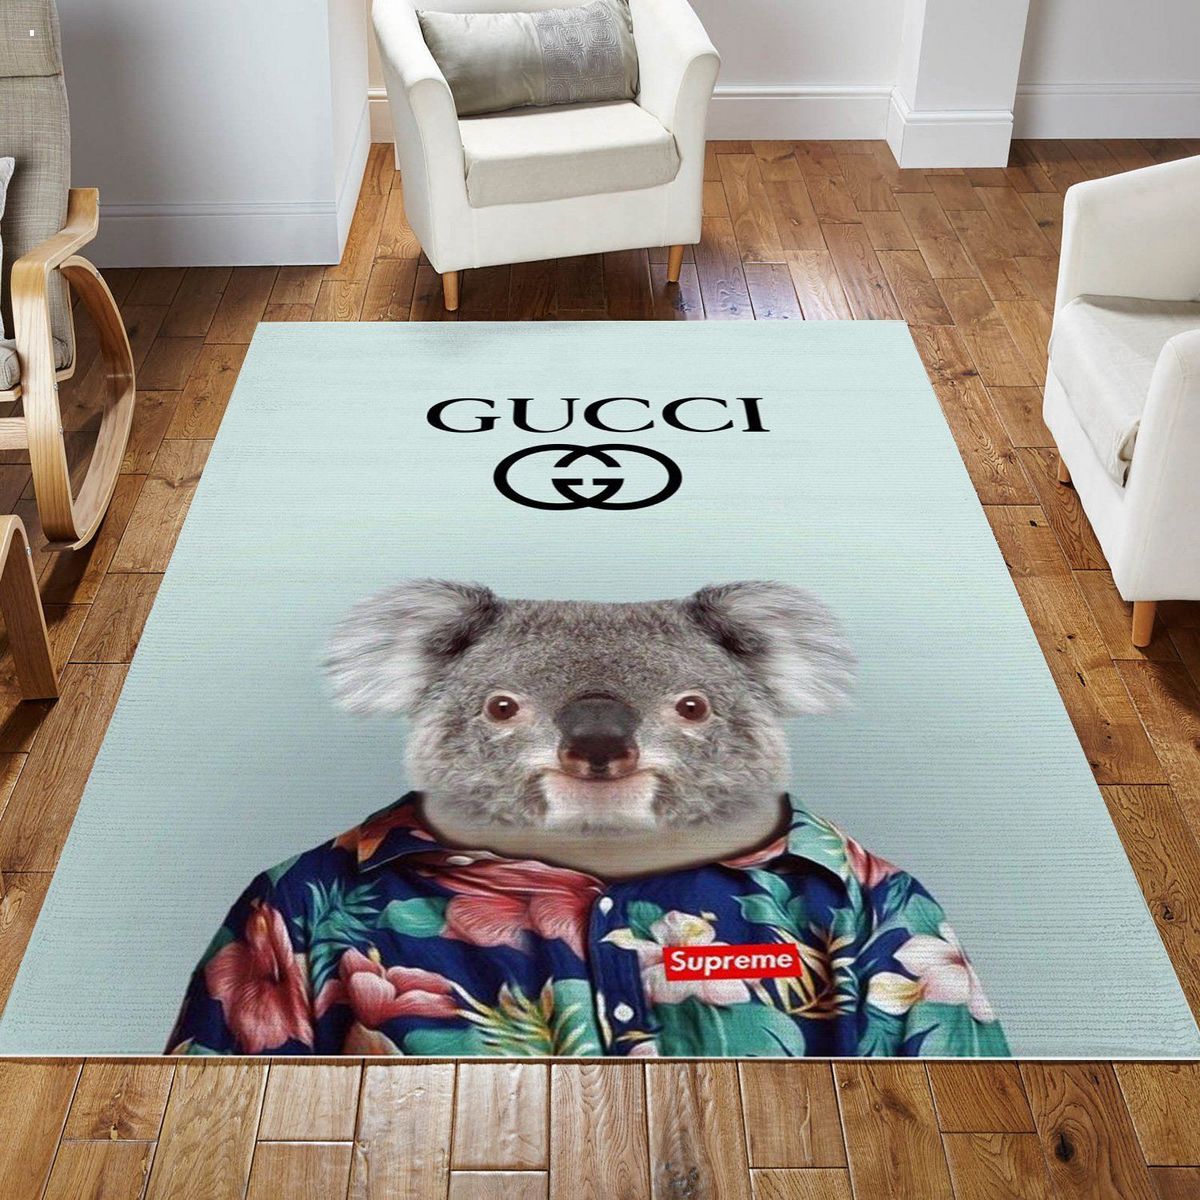 Gucci Blue Mix Supreme Printing Mouse For Living Room Bedroom Luxury Brand Carpet Rug Limited Edition